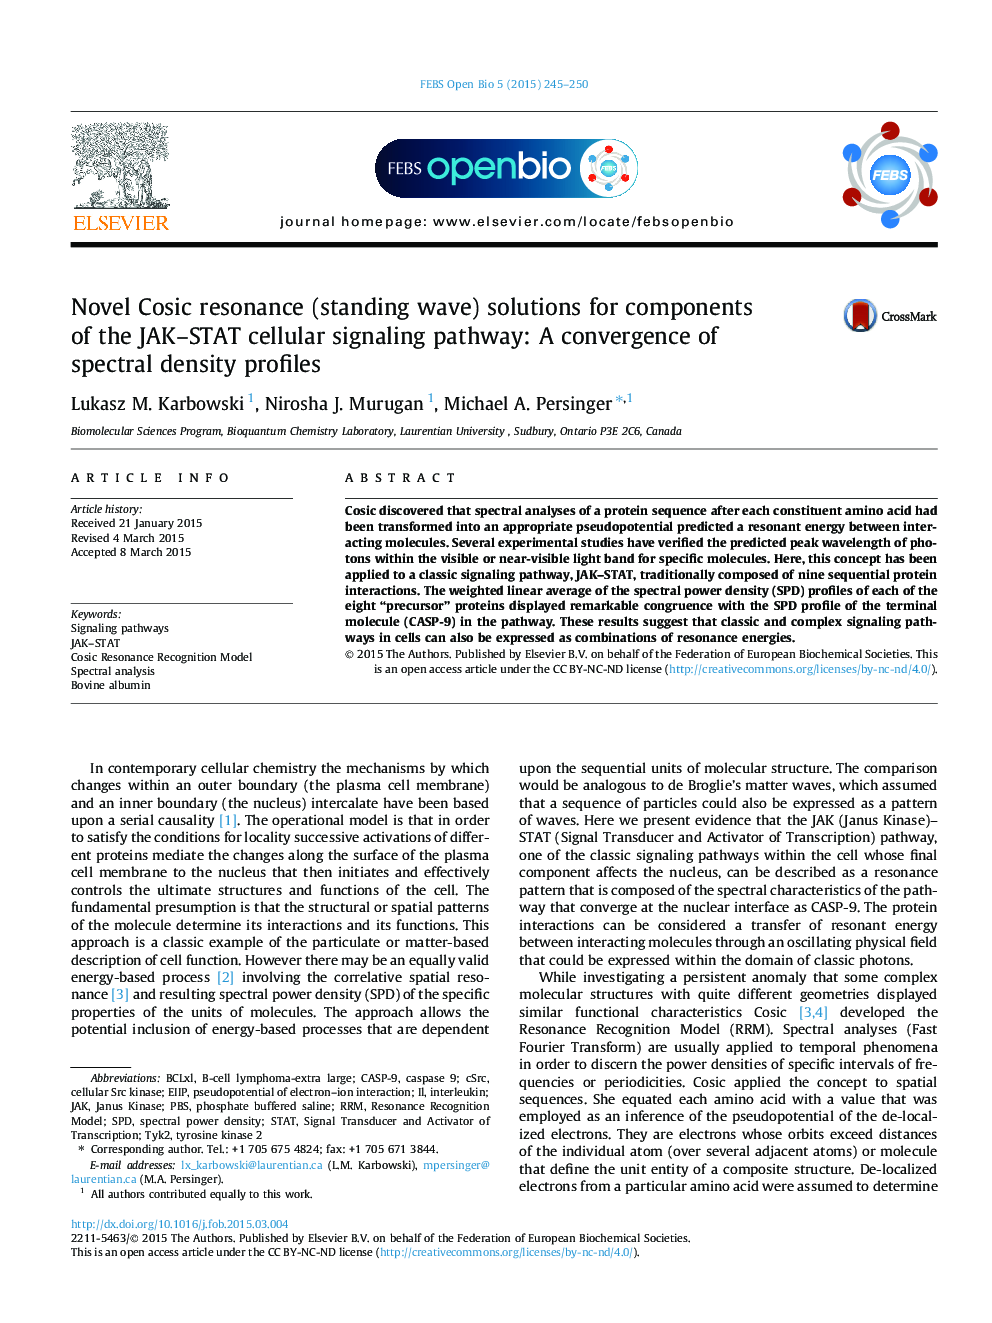 Novel Cosic resonance (standing wave) solutions for components of the JAK–STAT cellular signaling pathway: A convergence of spectral density profiles